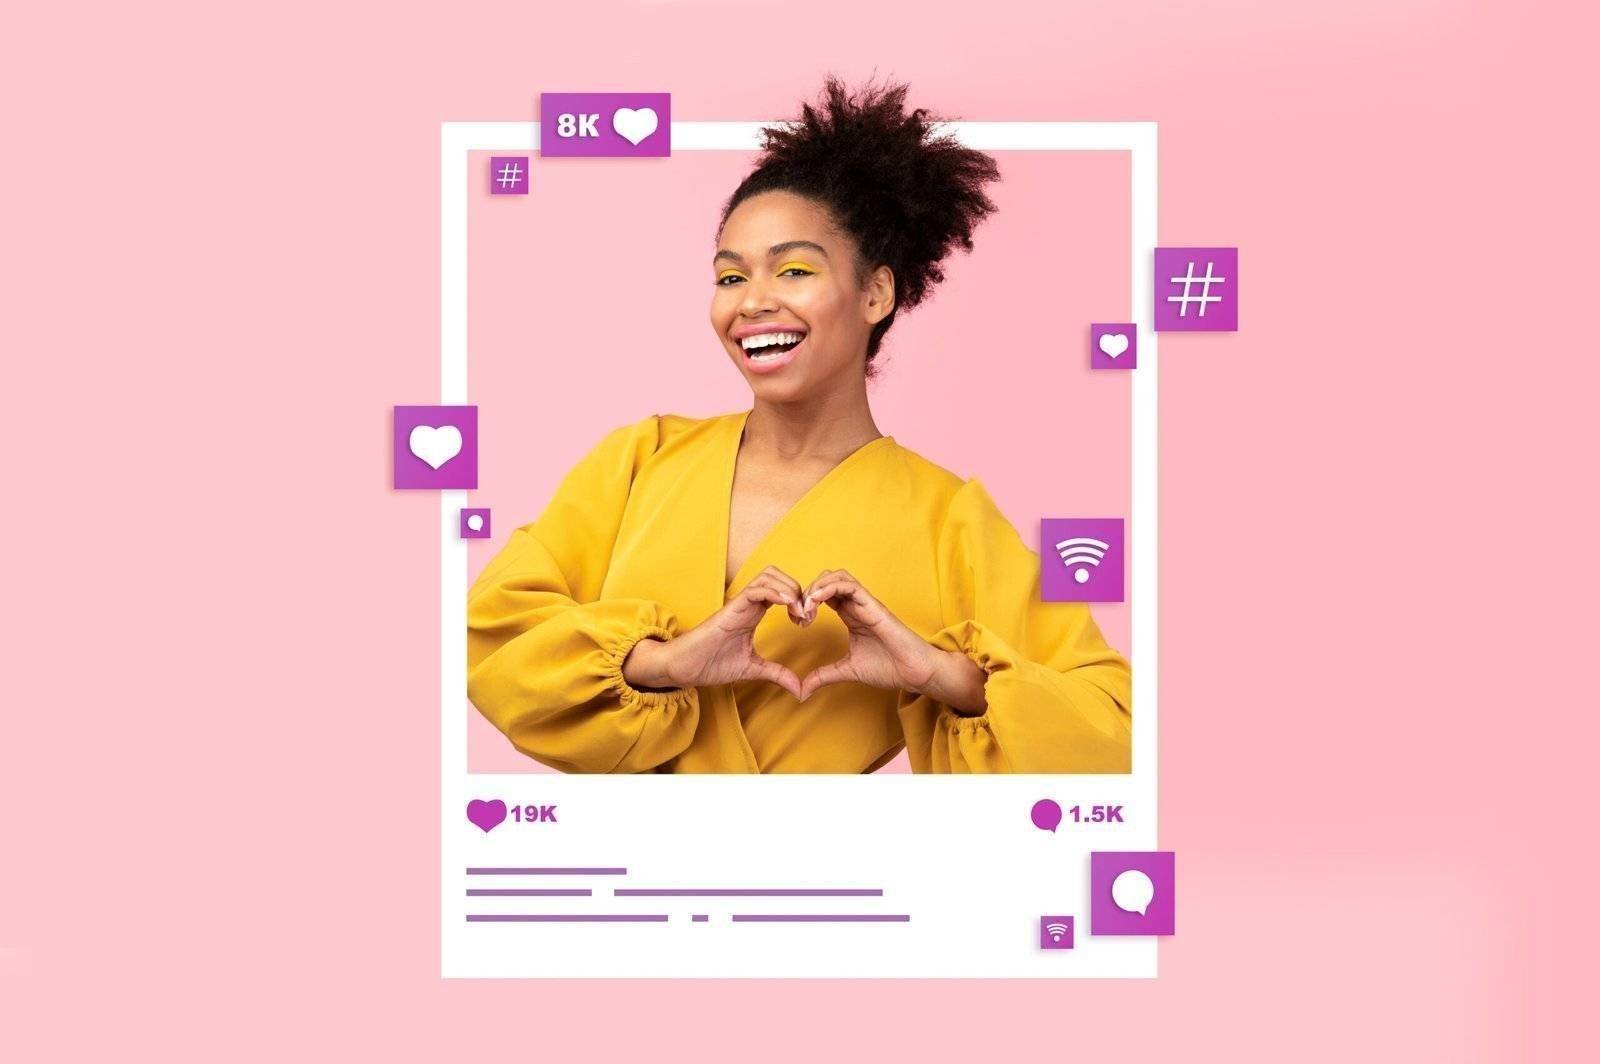 Collage with young black woman making heart gesture in photo frame, requesting likes in social media on pink studio background. Popular blogger asking her followers for positive feedback